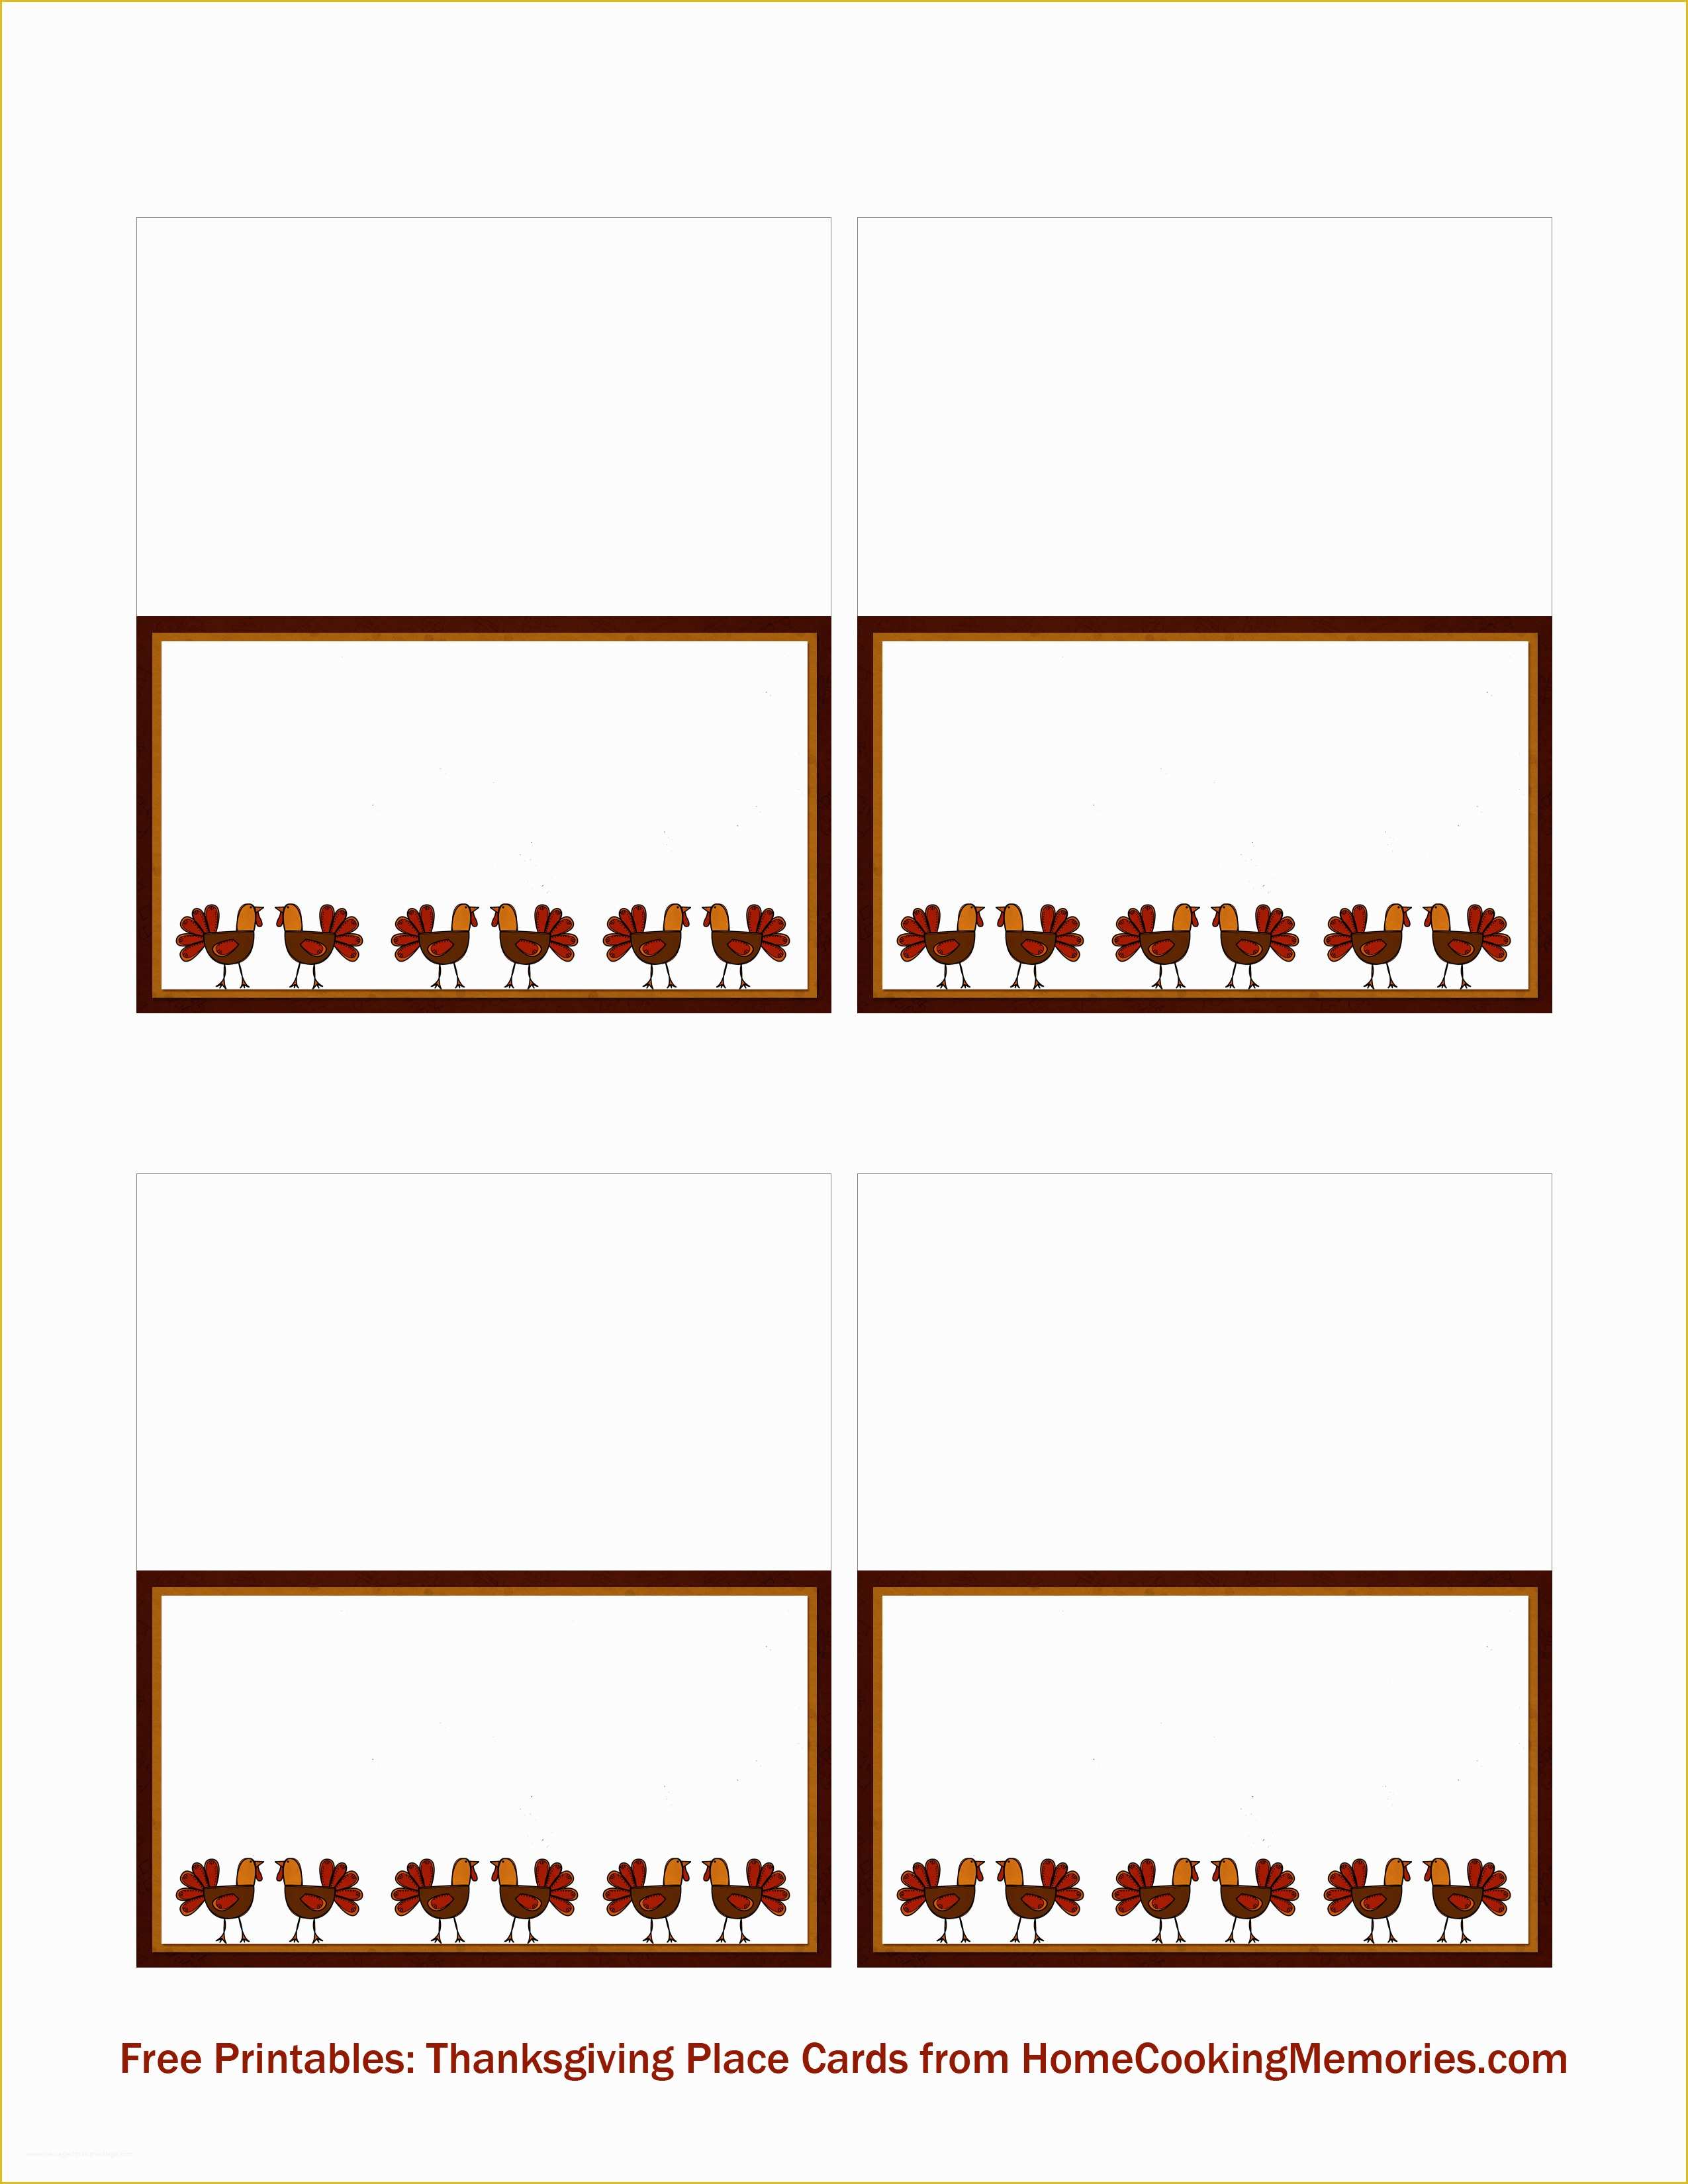 Free Place Card Template Of Free Printables Thanksgiving Place Cards Home Cooking